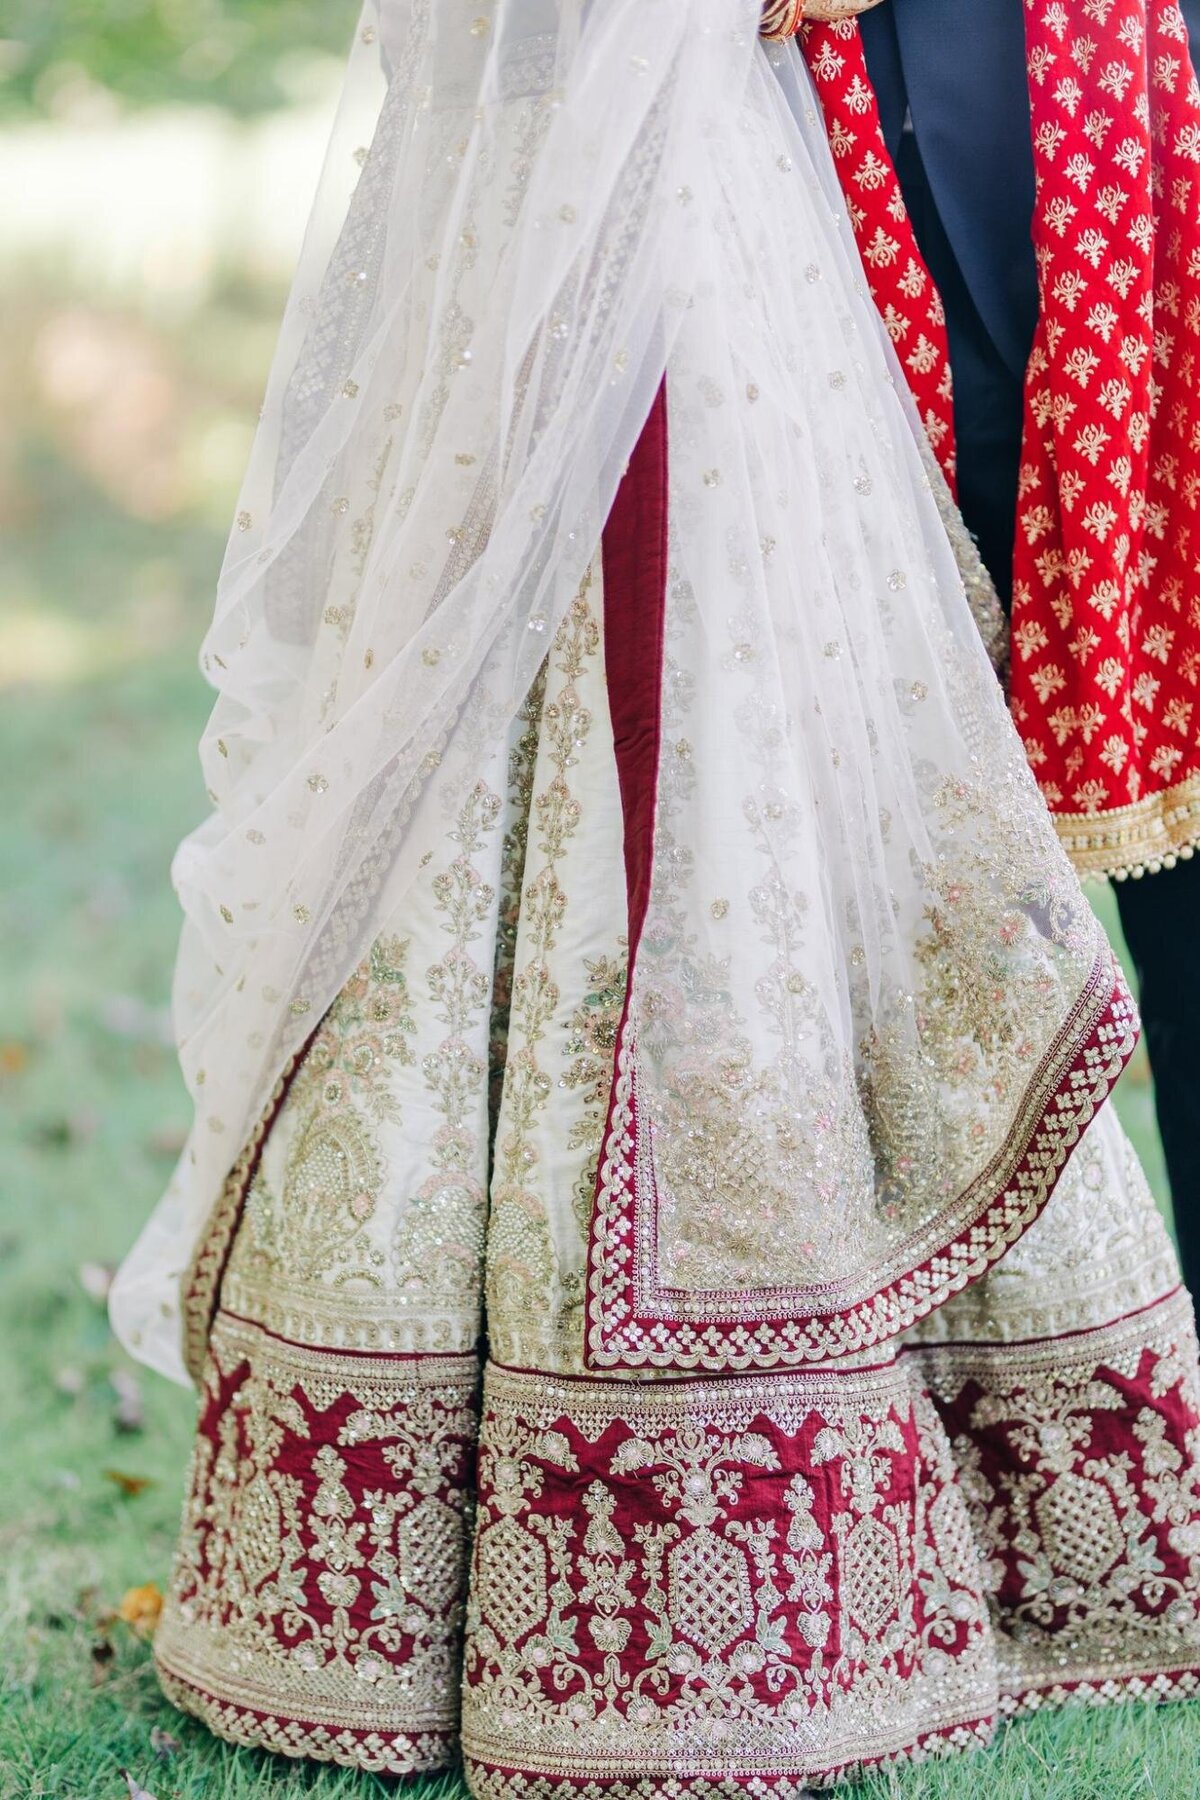 Detailed view of a bride and groom in traditional indian wedding attire, focusing on the intricate designs of the bride's saree and veil.